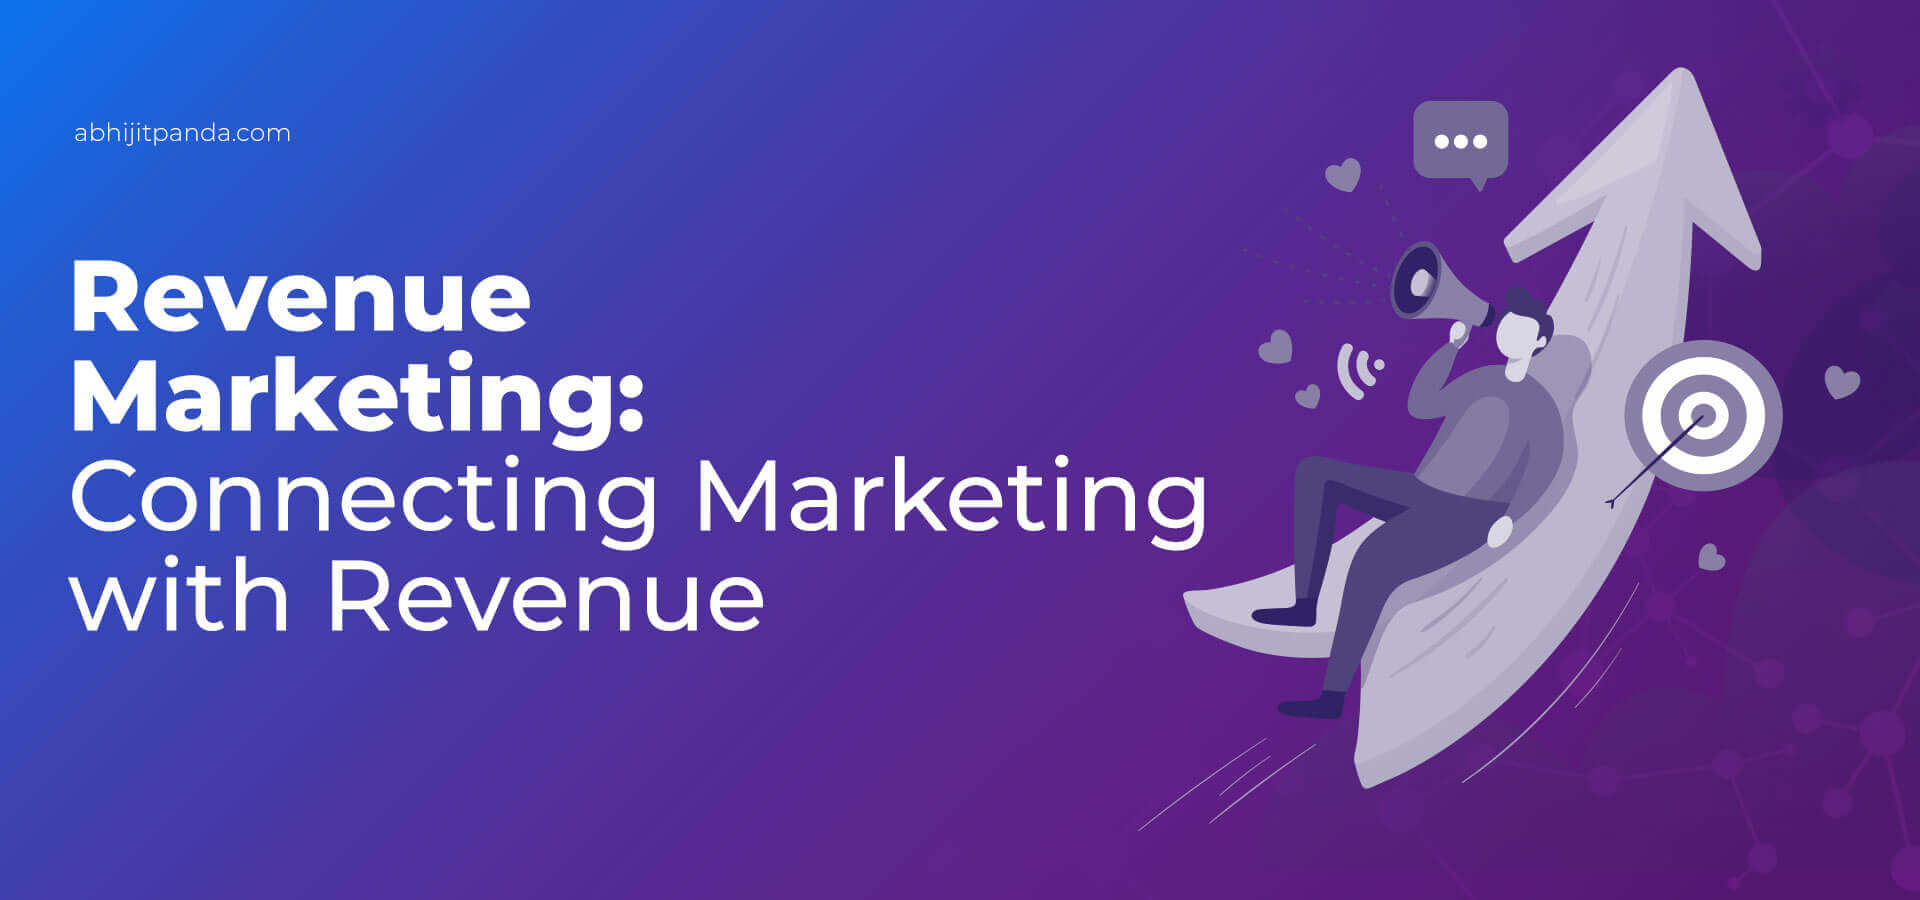 Revenue Marketing Connecting-Marketing-with-Revenue